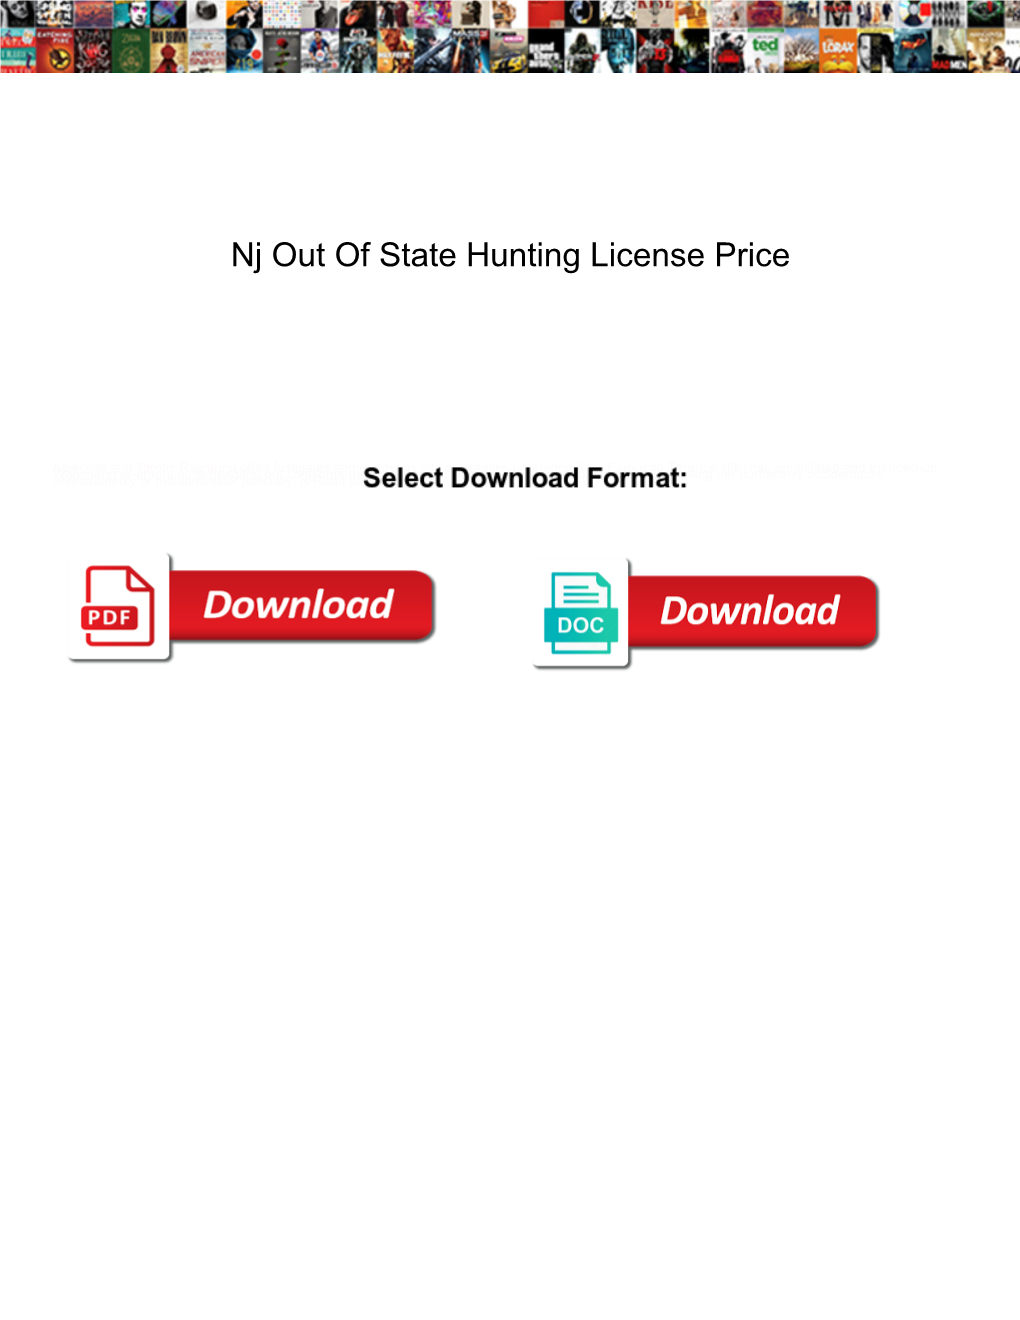 Nj out of State Hunting License Price